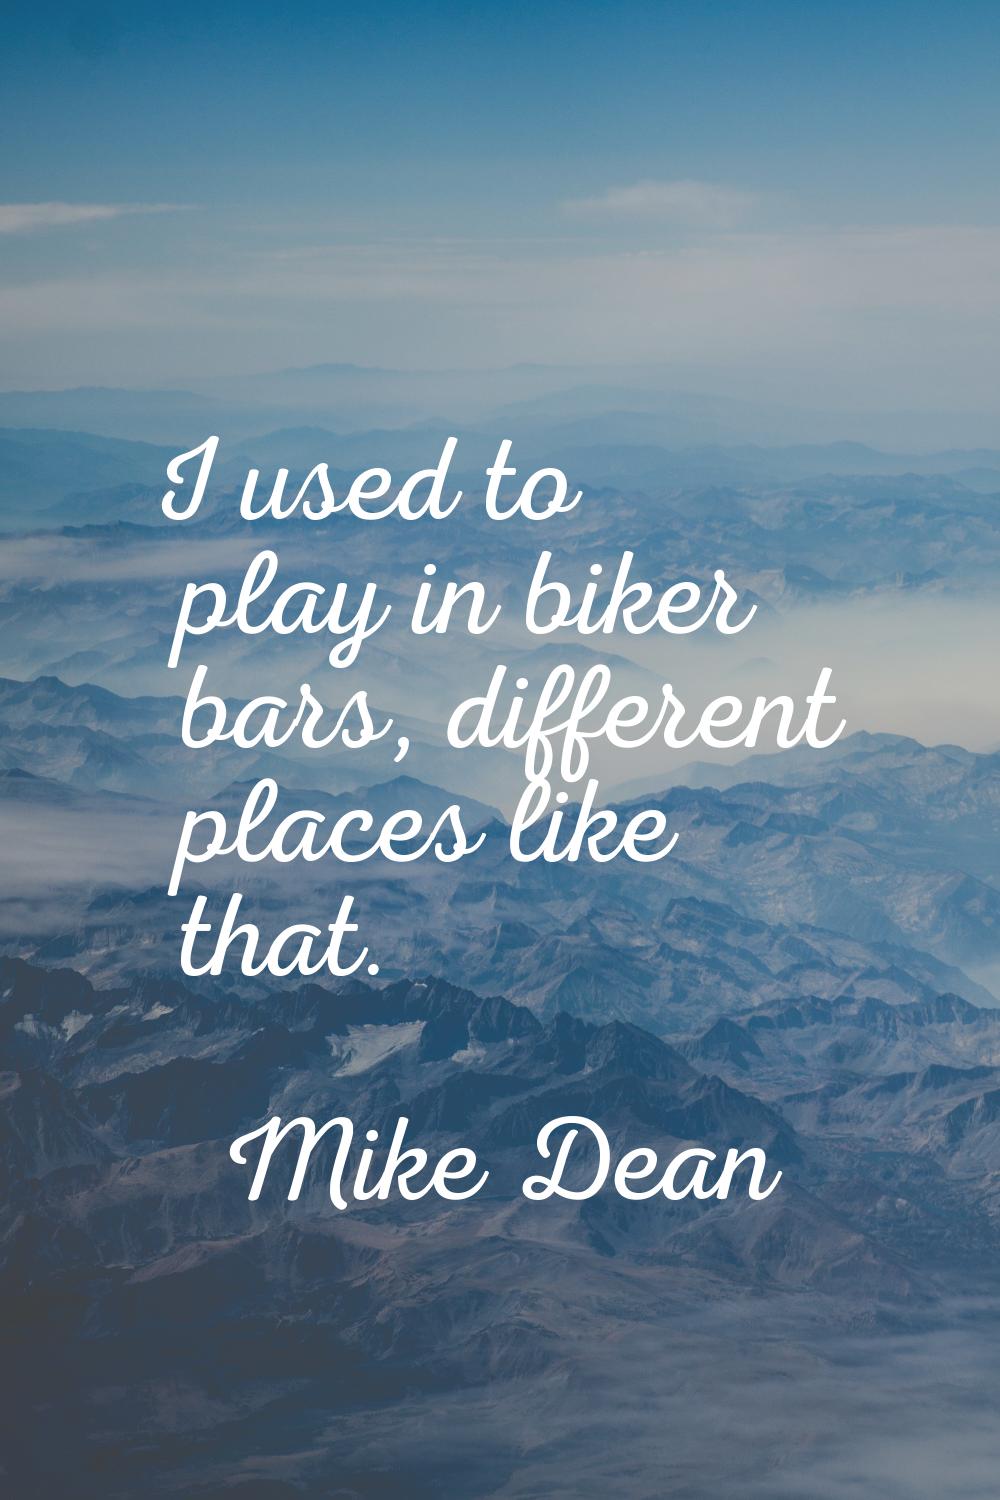 I used to play in biker bars, different places like that.